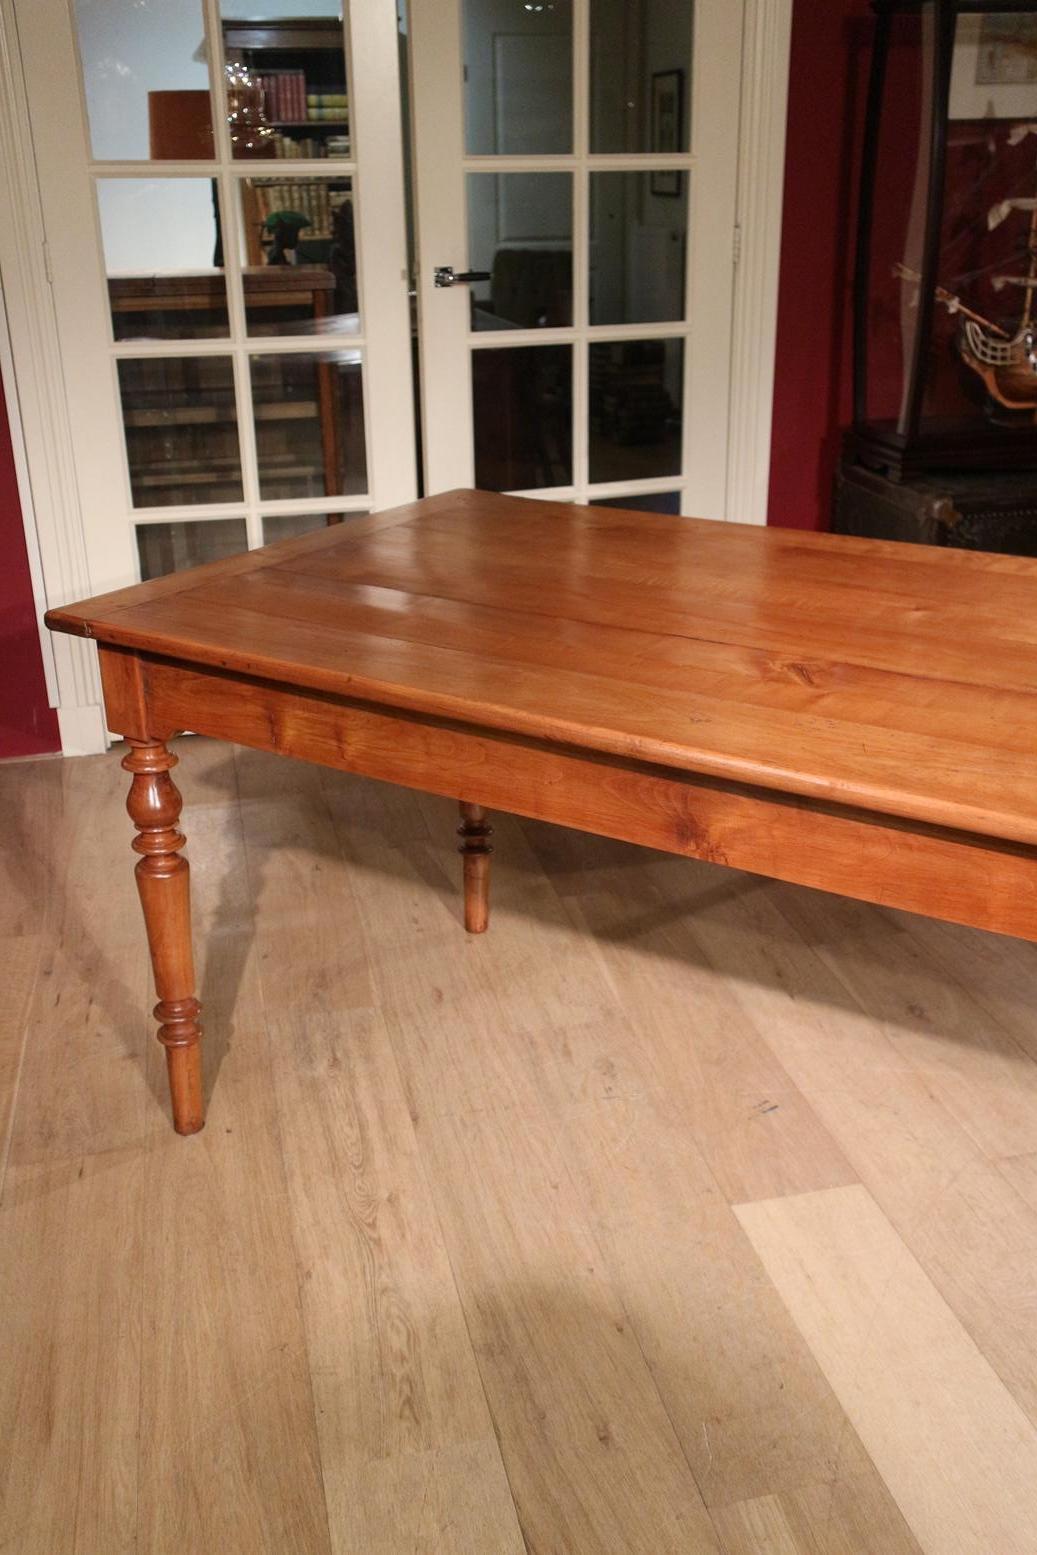 Large 19th Century French Cherrywood Farmhouse Table (Kirsche)